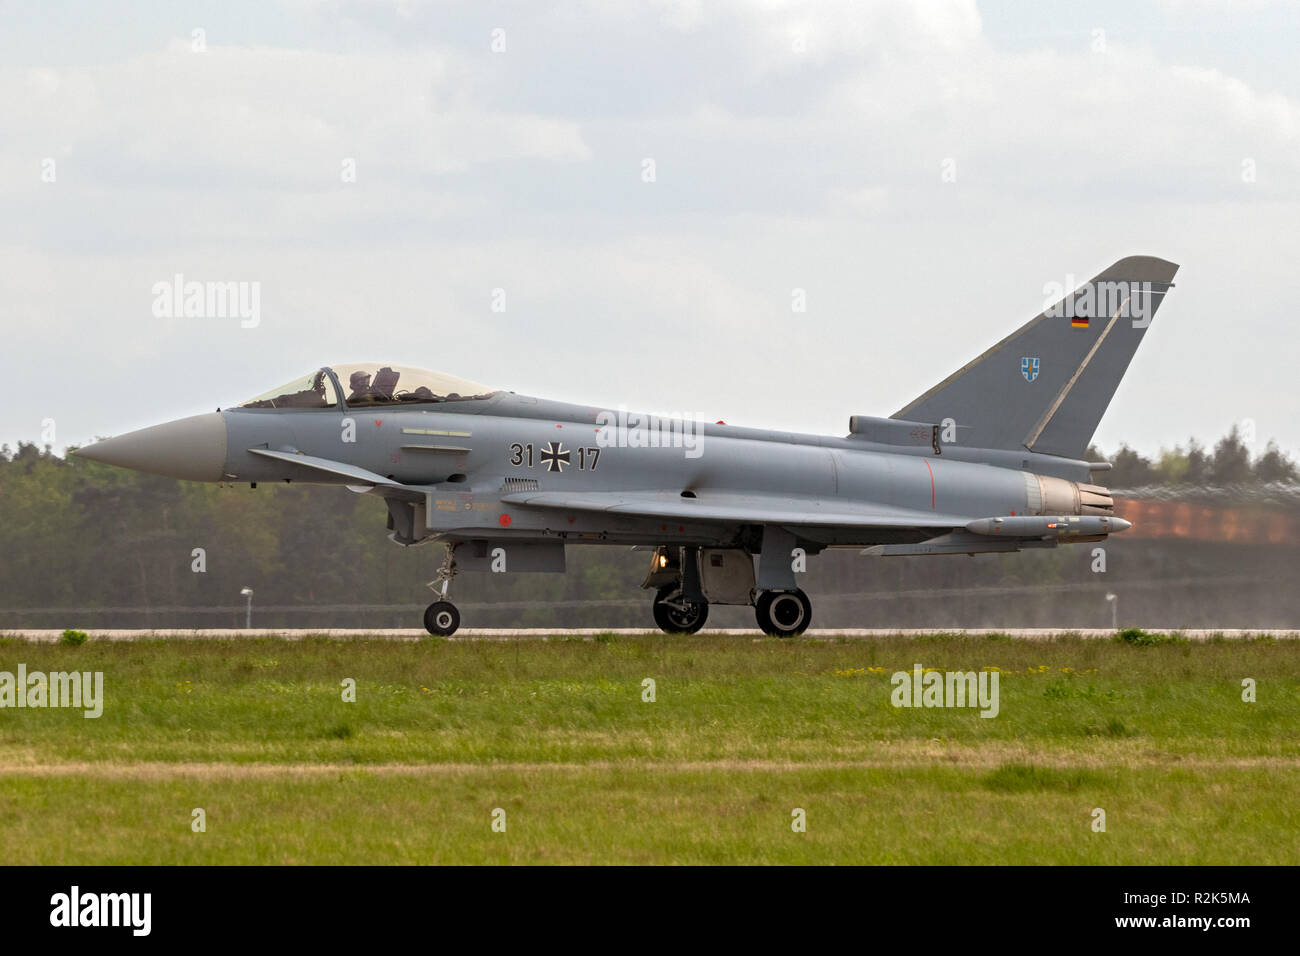 BERLIN - APR 27, 2018: German air force Eurofighter EF-2000 Typhoon fighter jet plane taking off during the Berlin ILA Air Show. Stock Photo